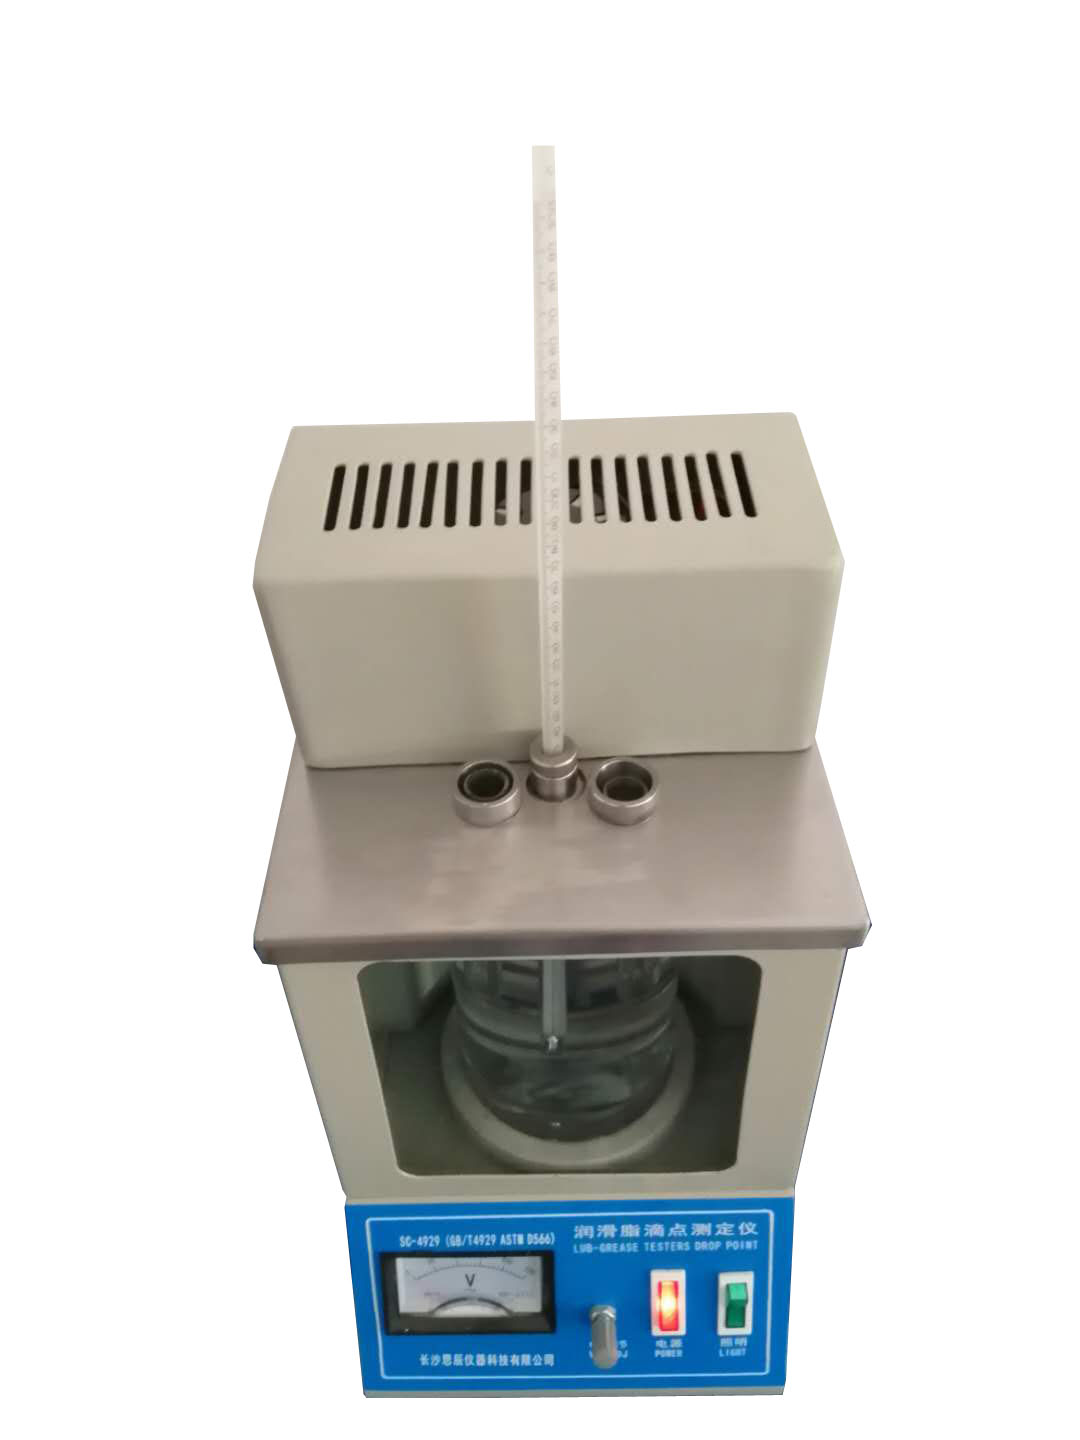 SC-4929 lubricating grease drop point tester